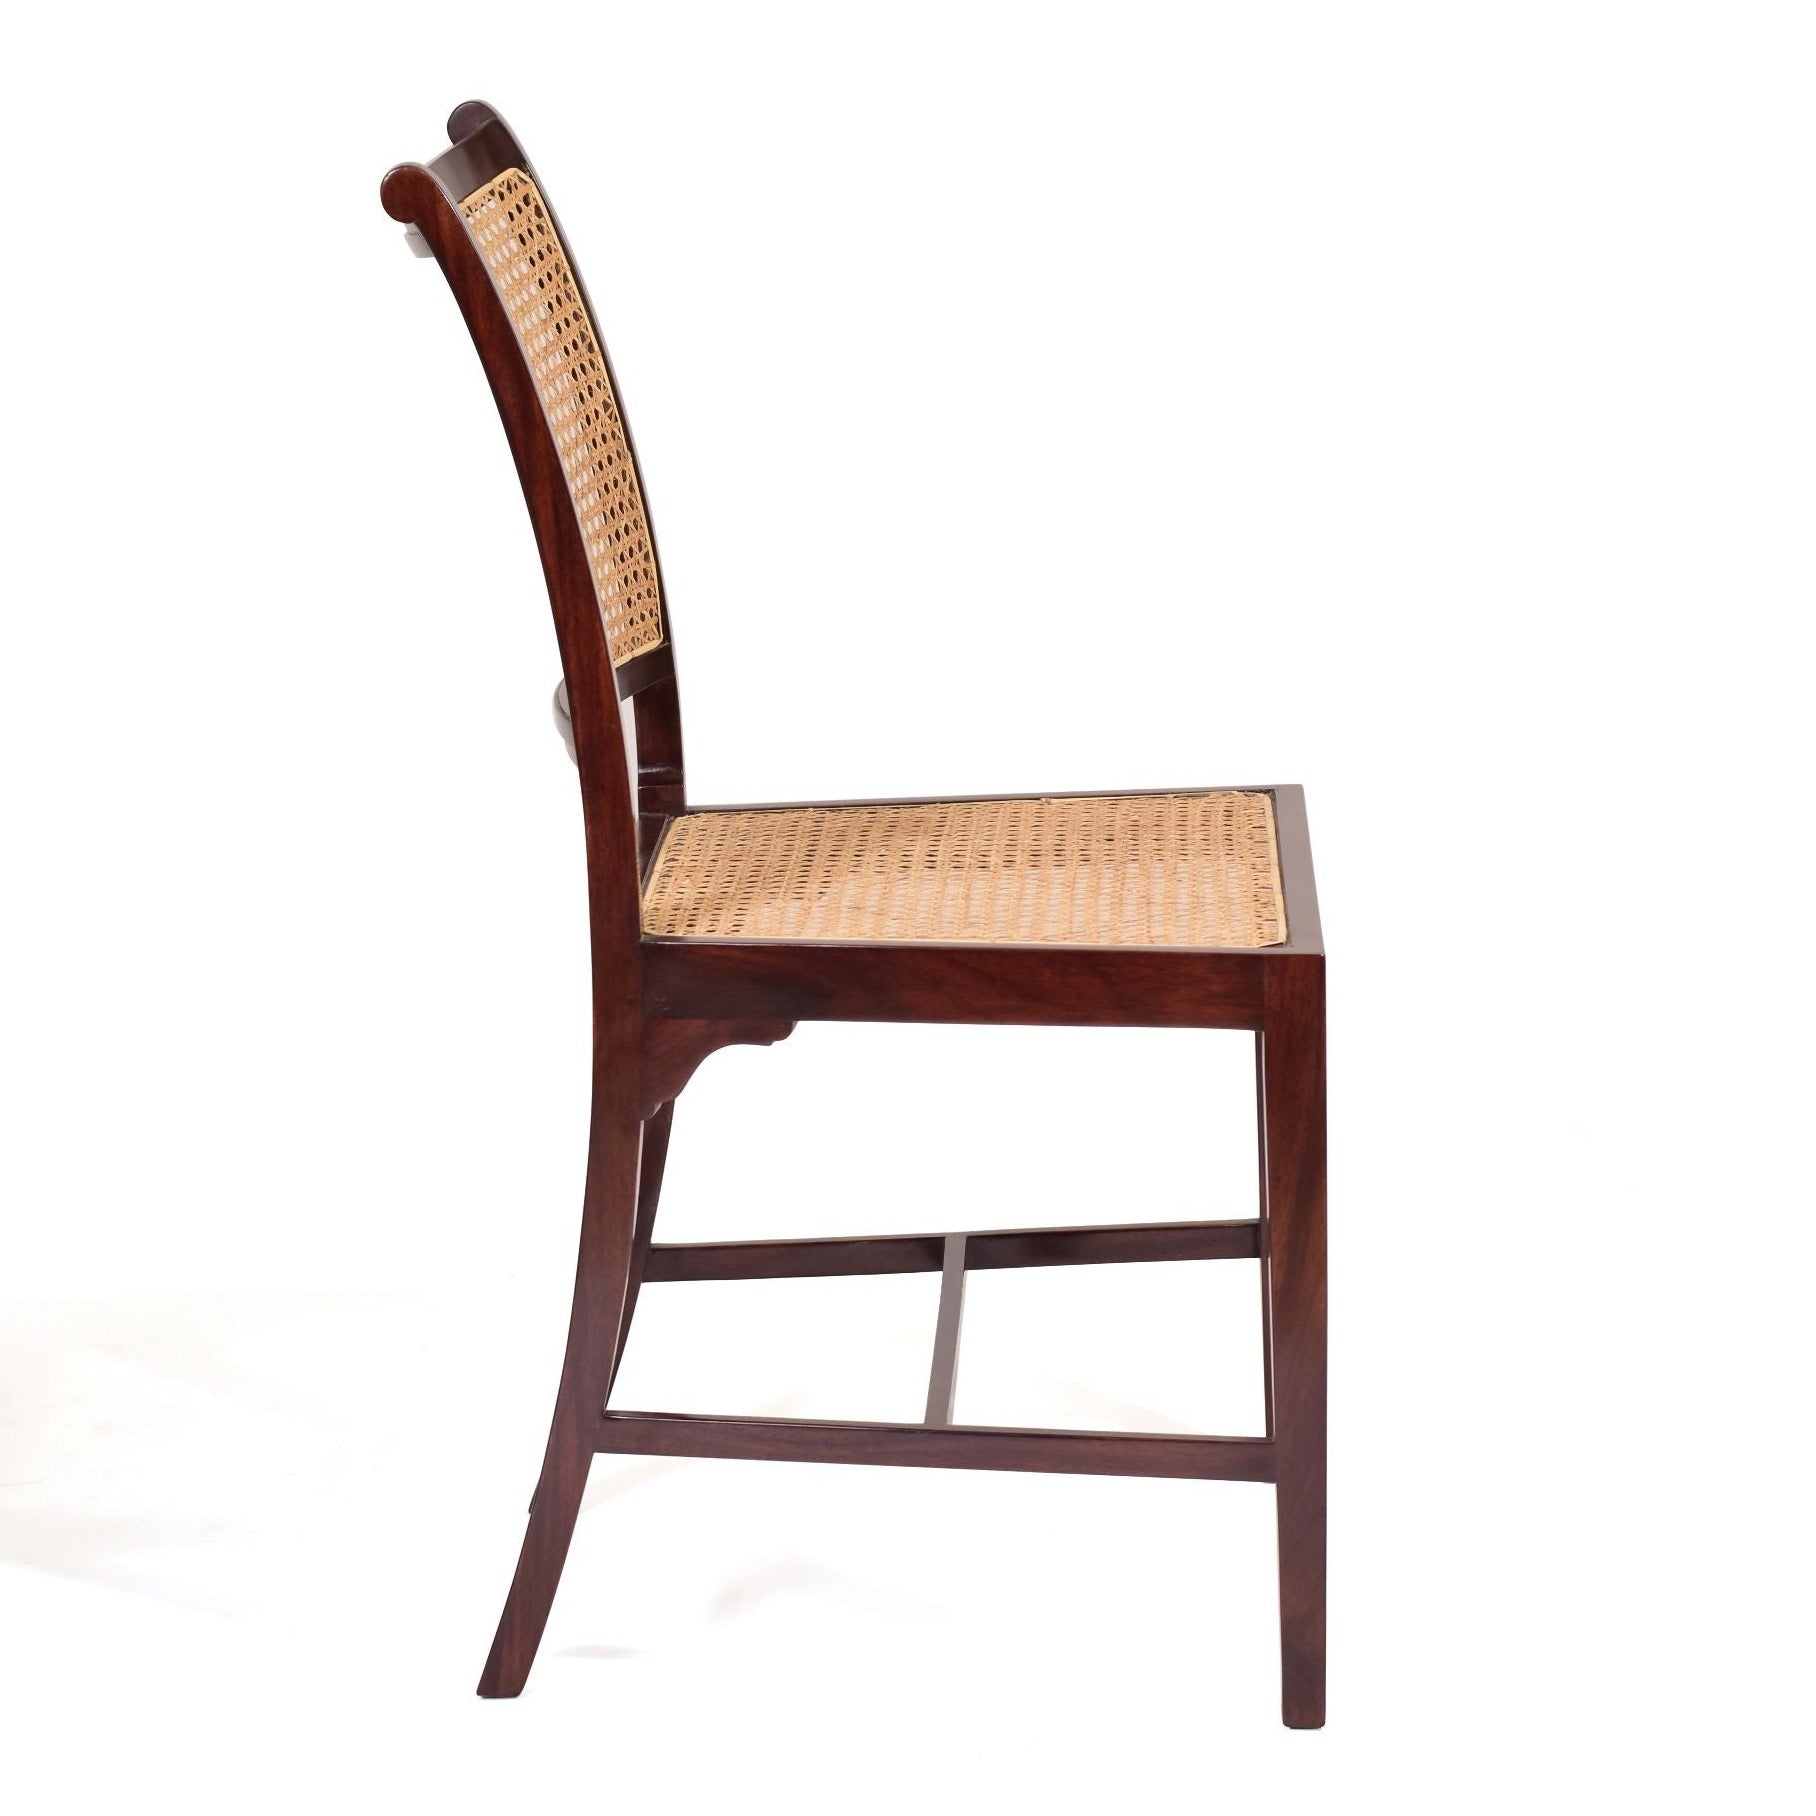 Gonsalves Chair Furniture dining chair - stationery product online - buy furniture online - wooden furniture for home - home furniture online - cane furniture - Vintage chair - Goan style furniture - trending furniture